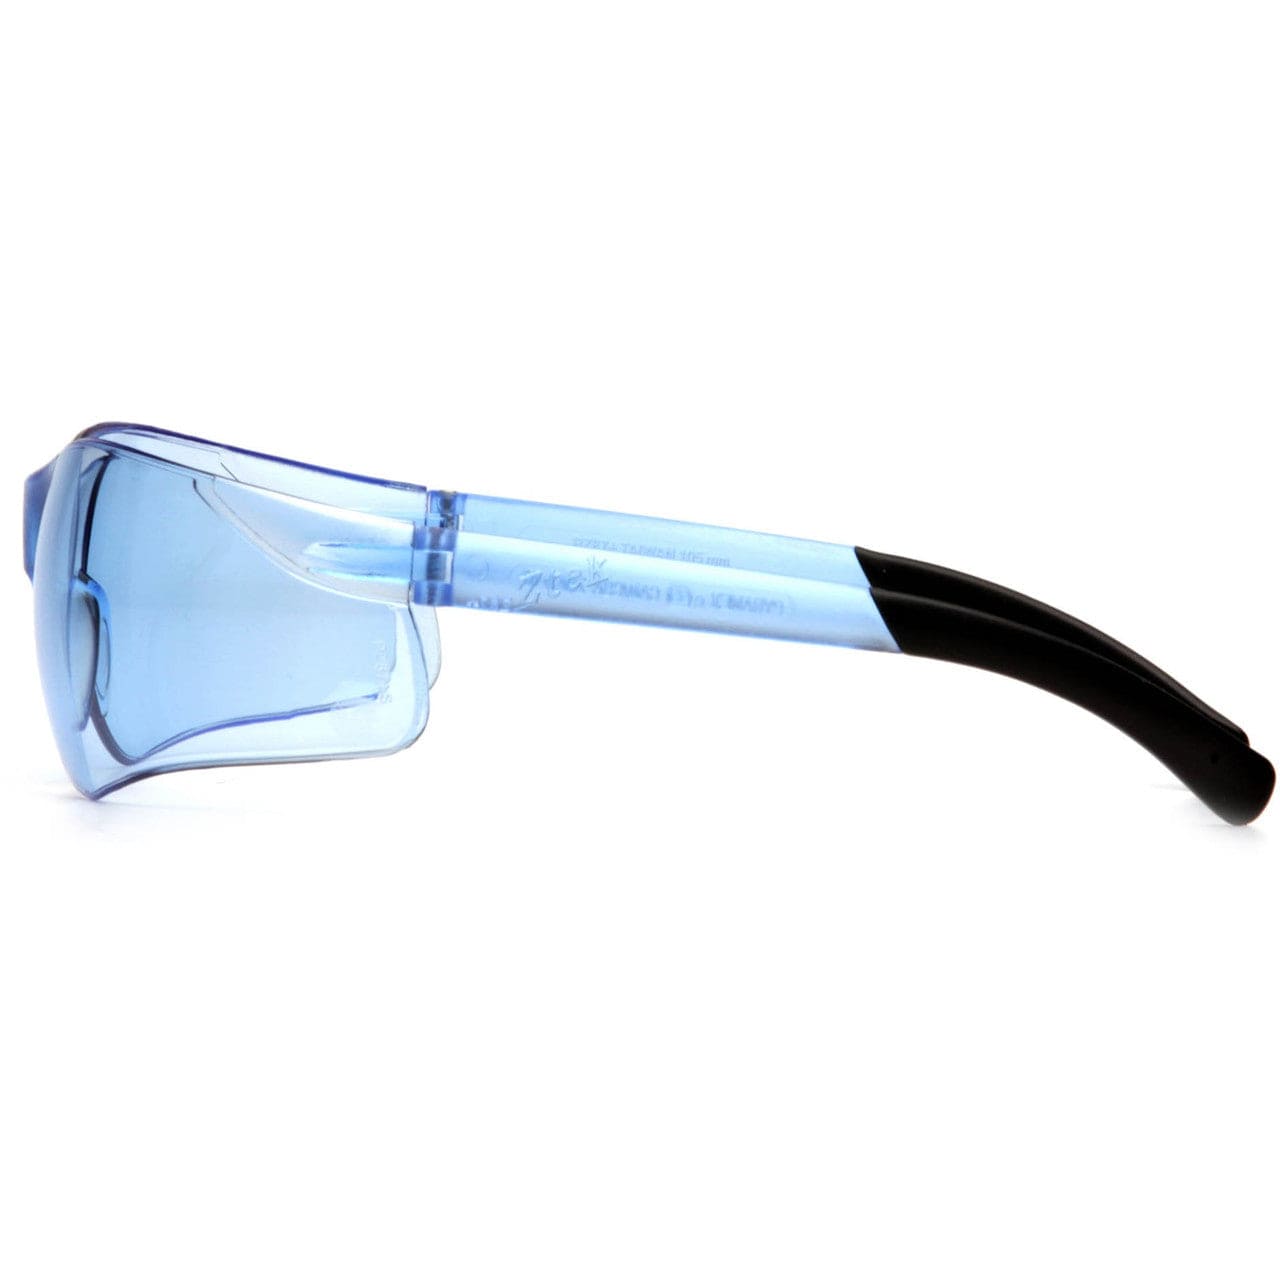 Pyramex Ztek Safety Glasses with Infinity Blue Anti-Fog Lens S2560ST Side View